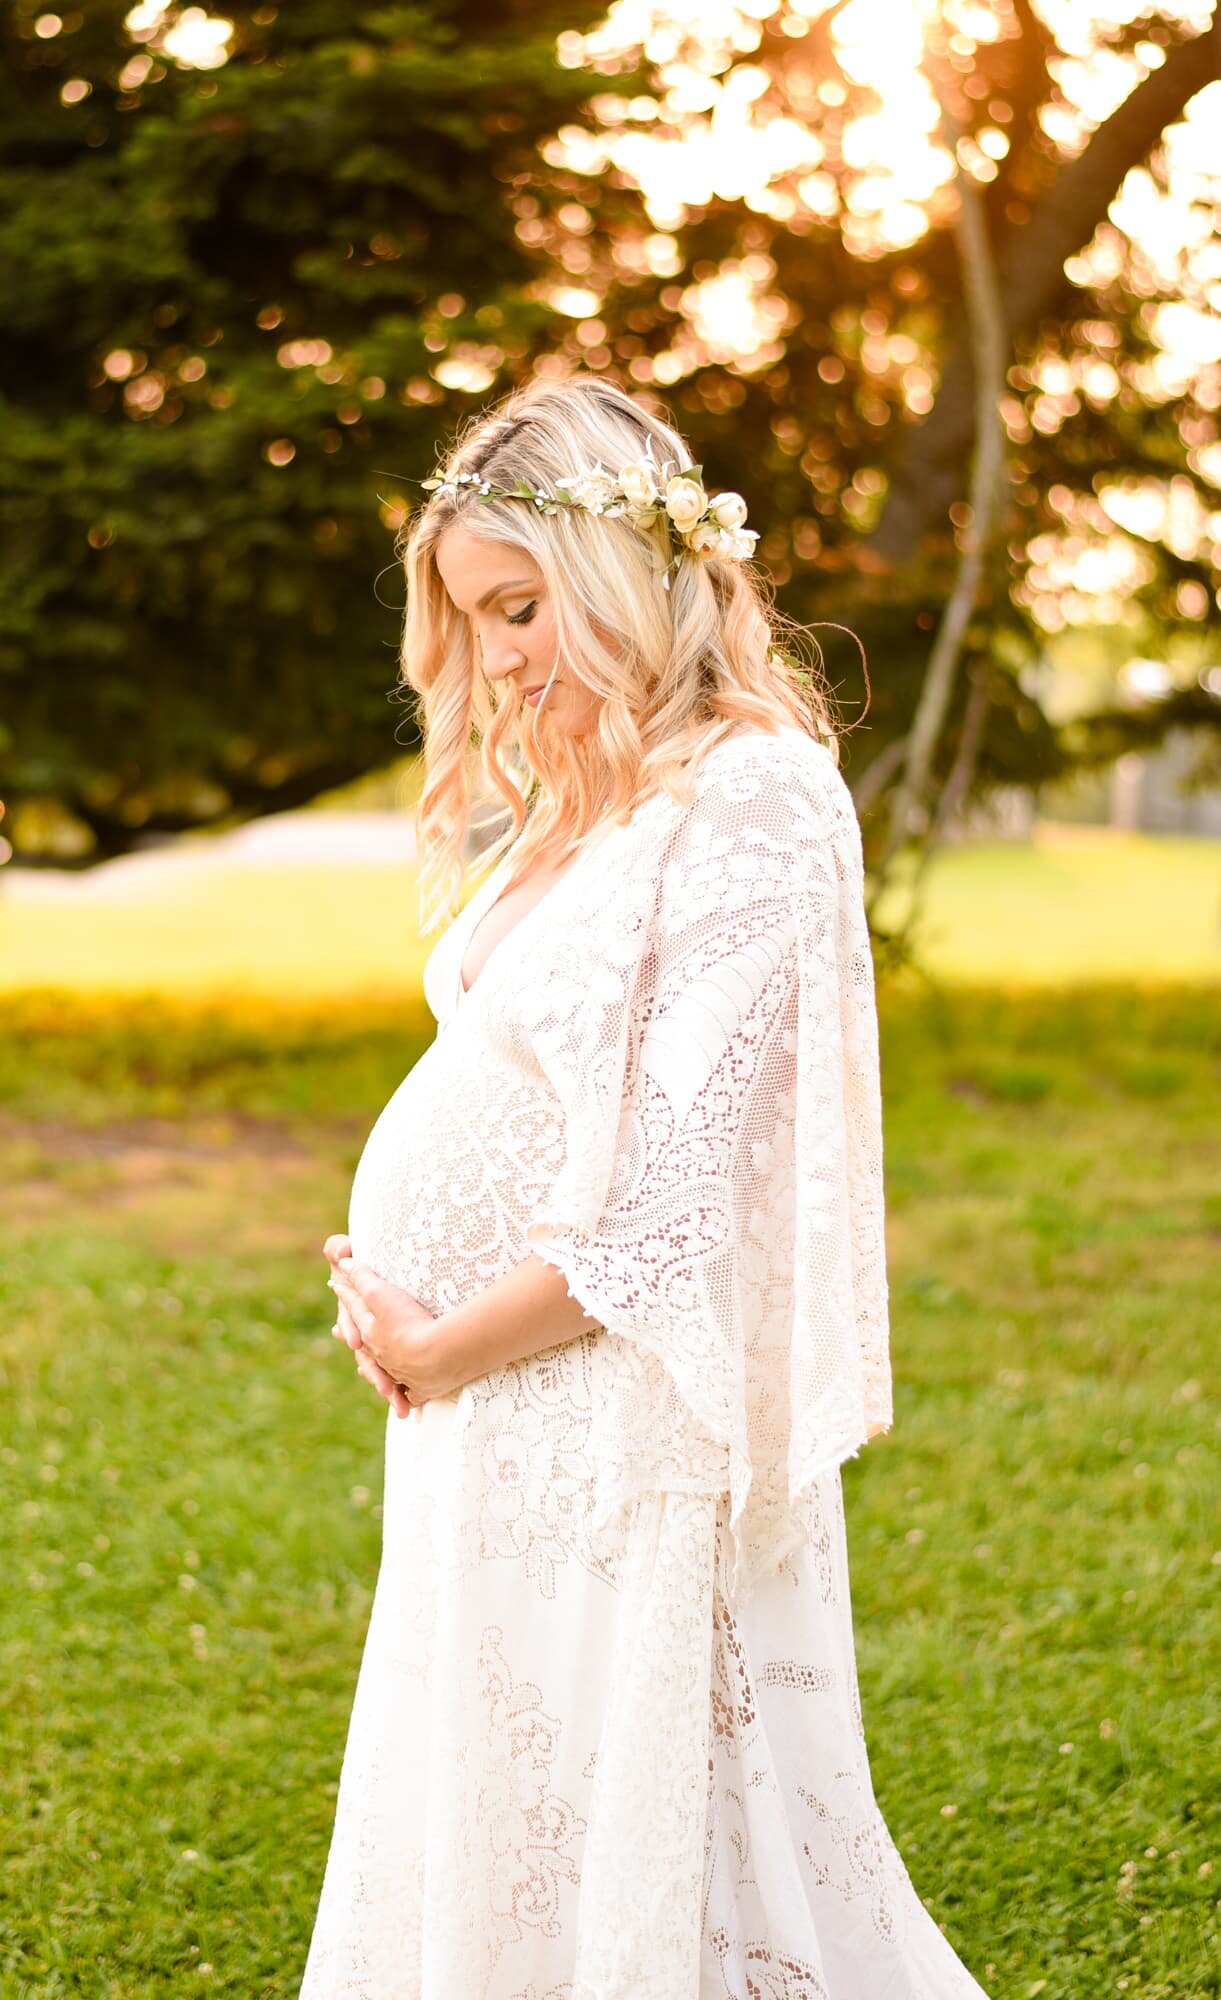 Maryland Maternity Photographer  3 Reasons Why Every Expecting